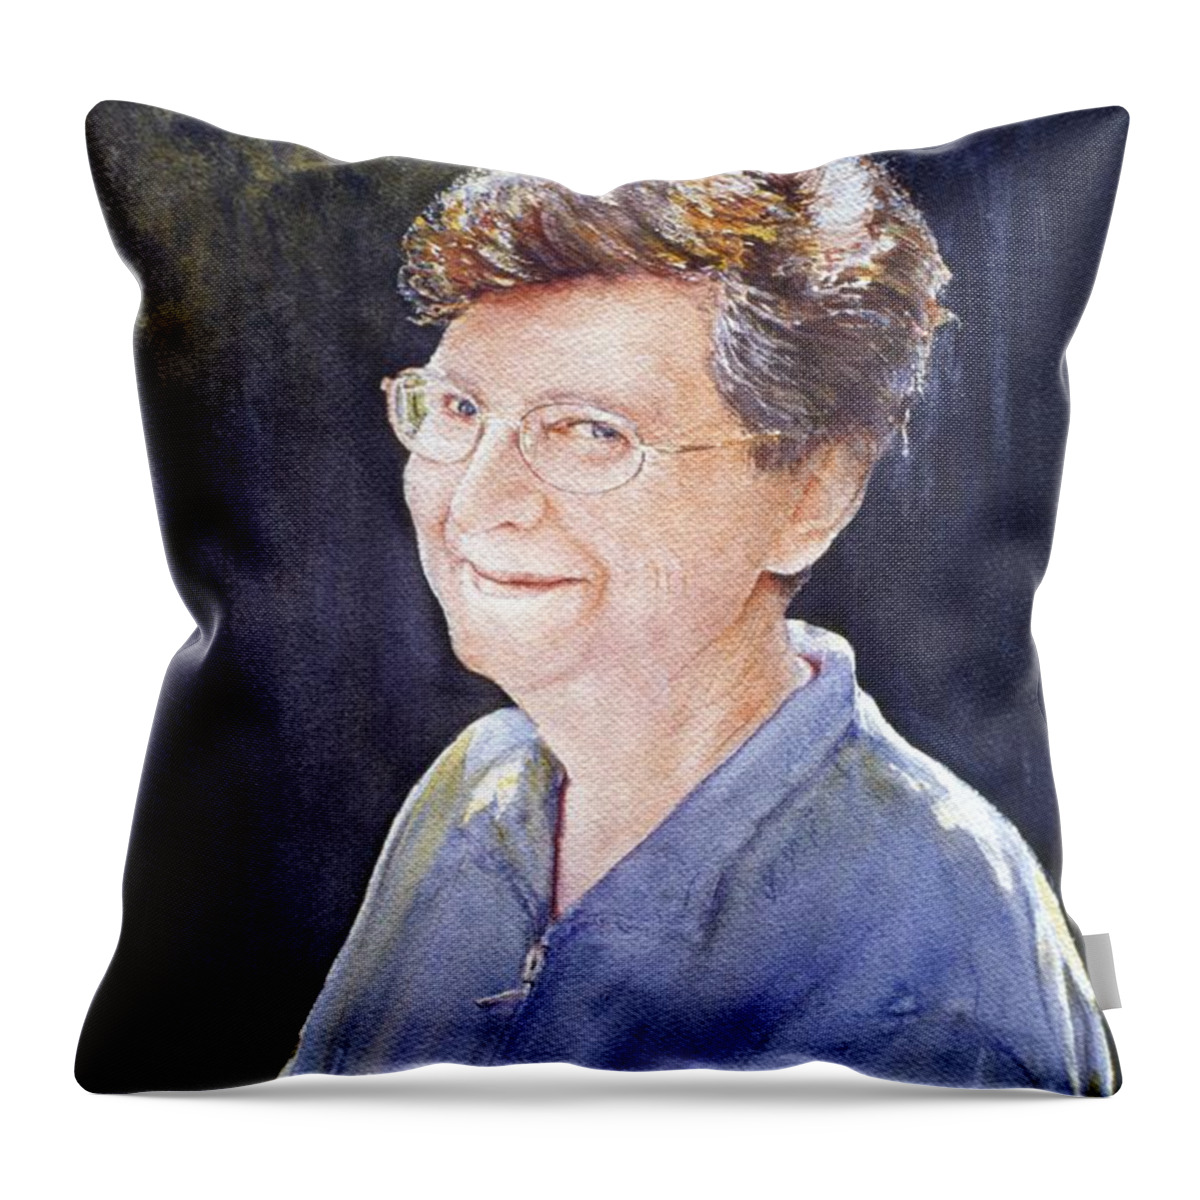 Portrait Throw Pillow featuring the painting Cindy by Barbara Pease